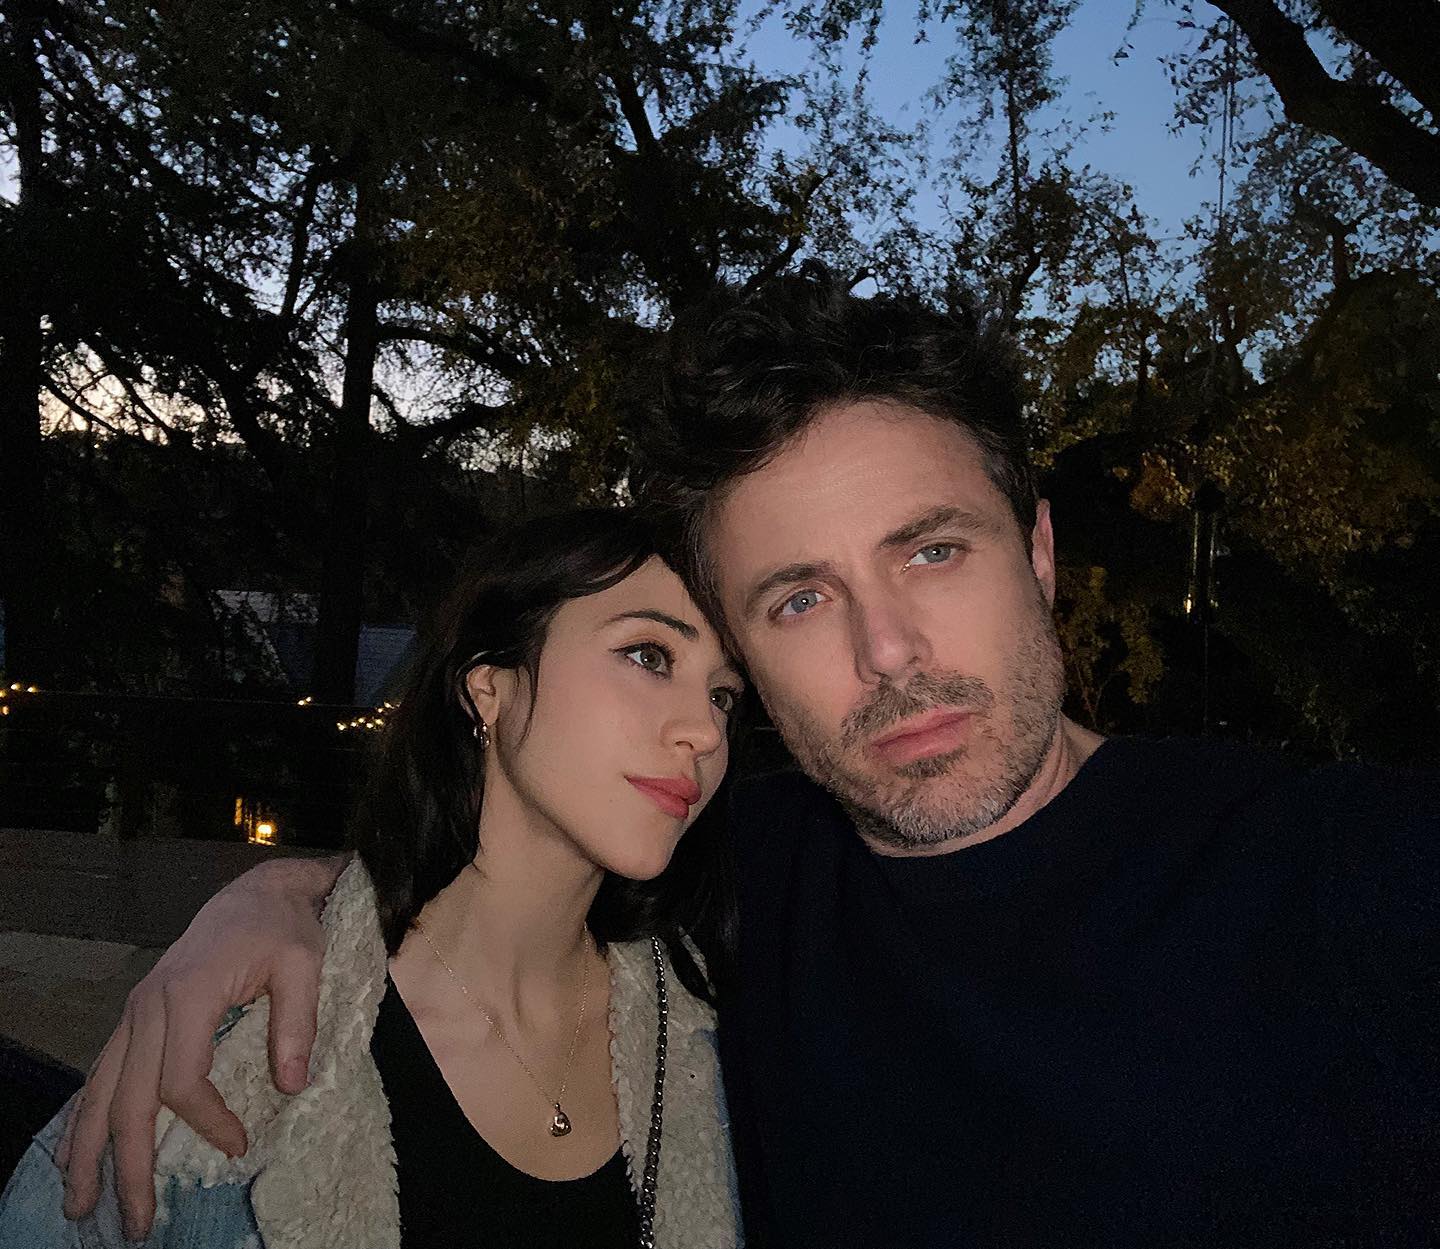 Who Is Caleb Casey McGuire Affleck Girlfriend 2022? All About Caylee Cowan